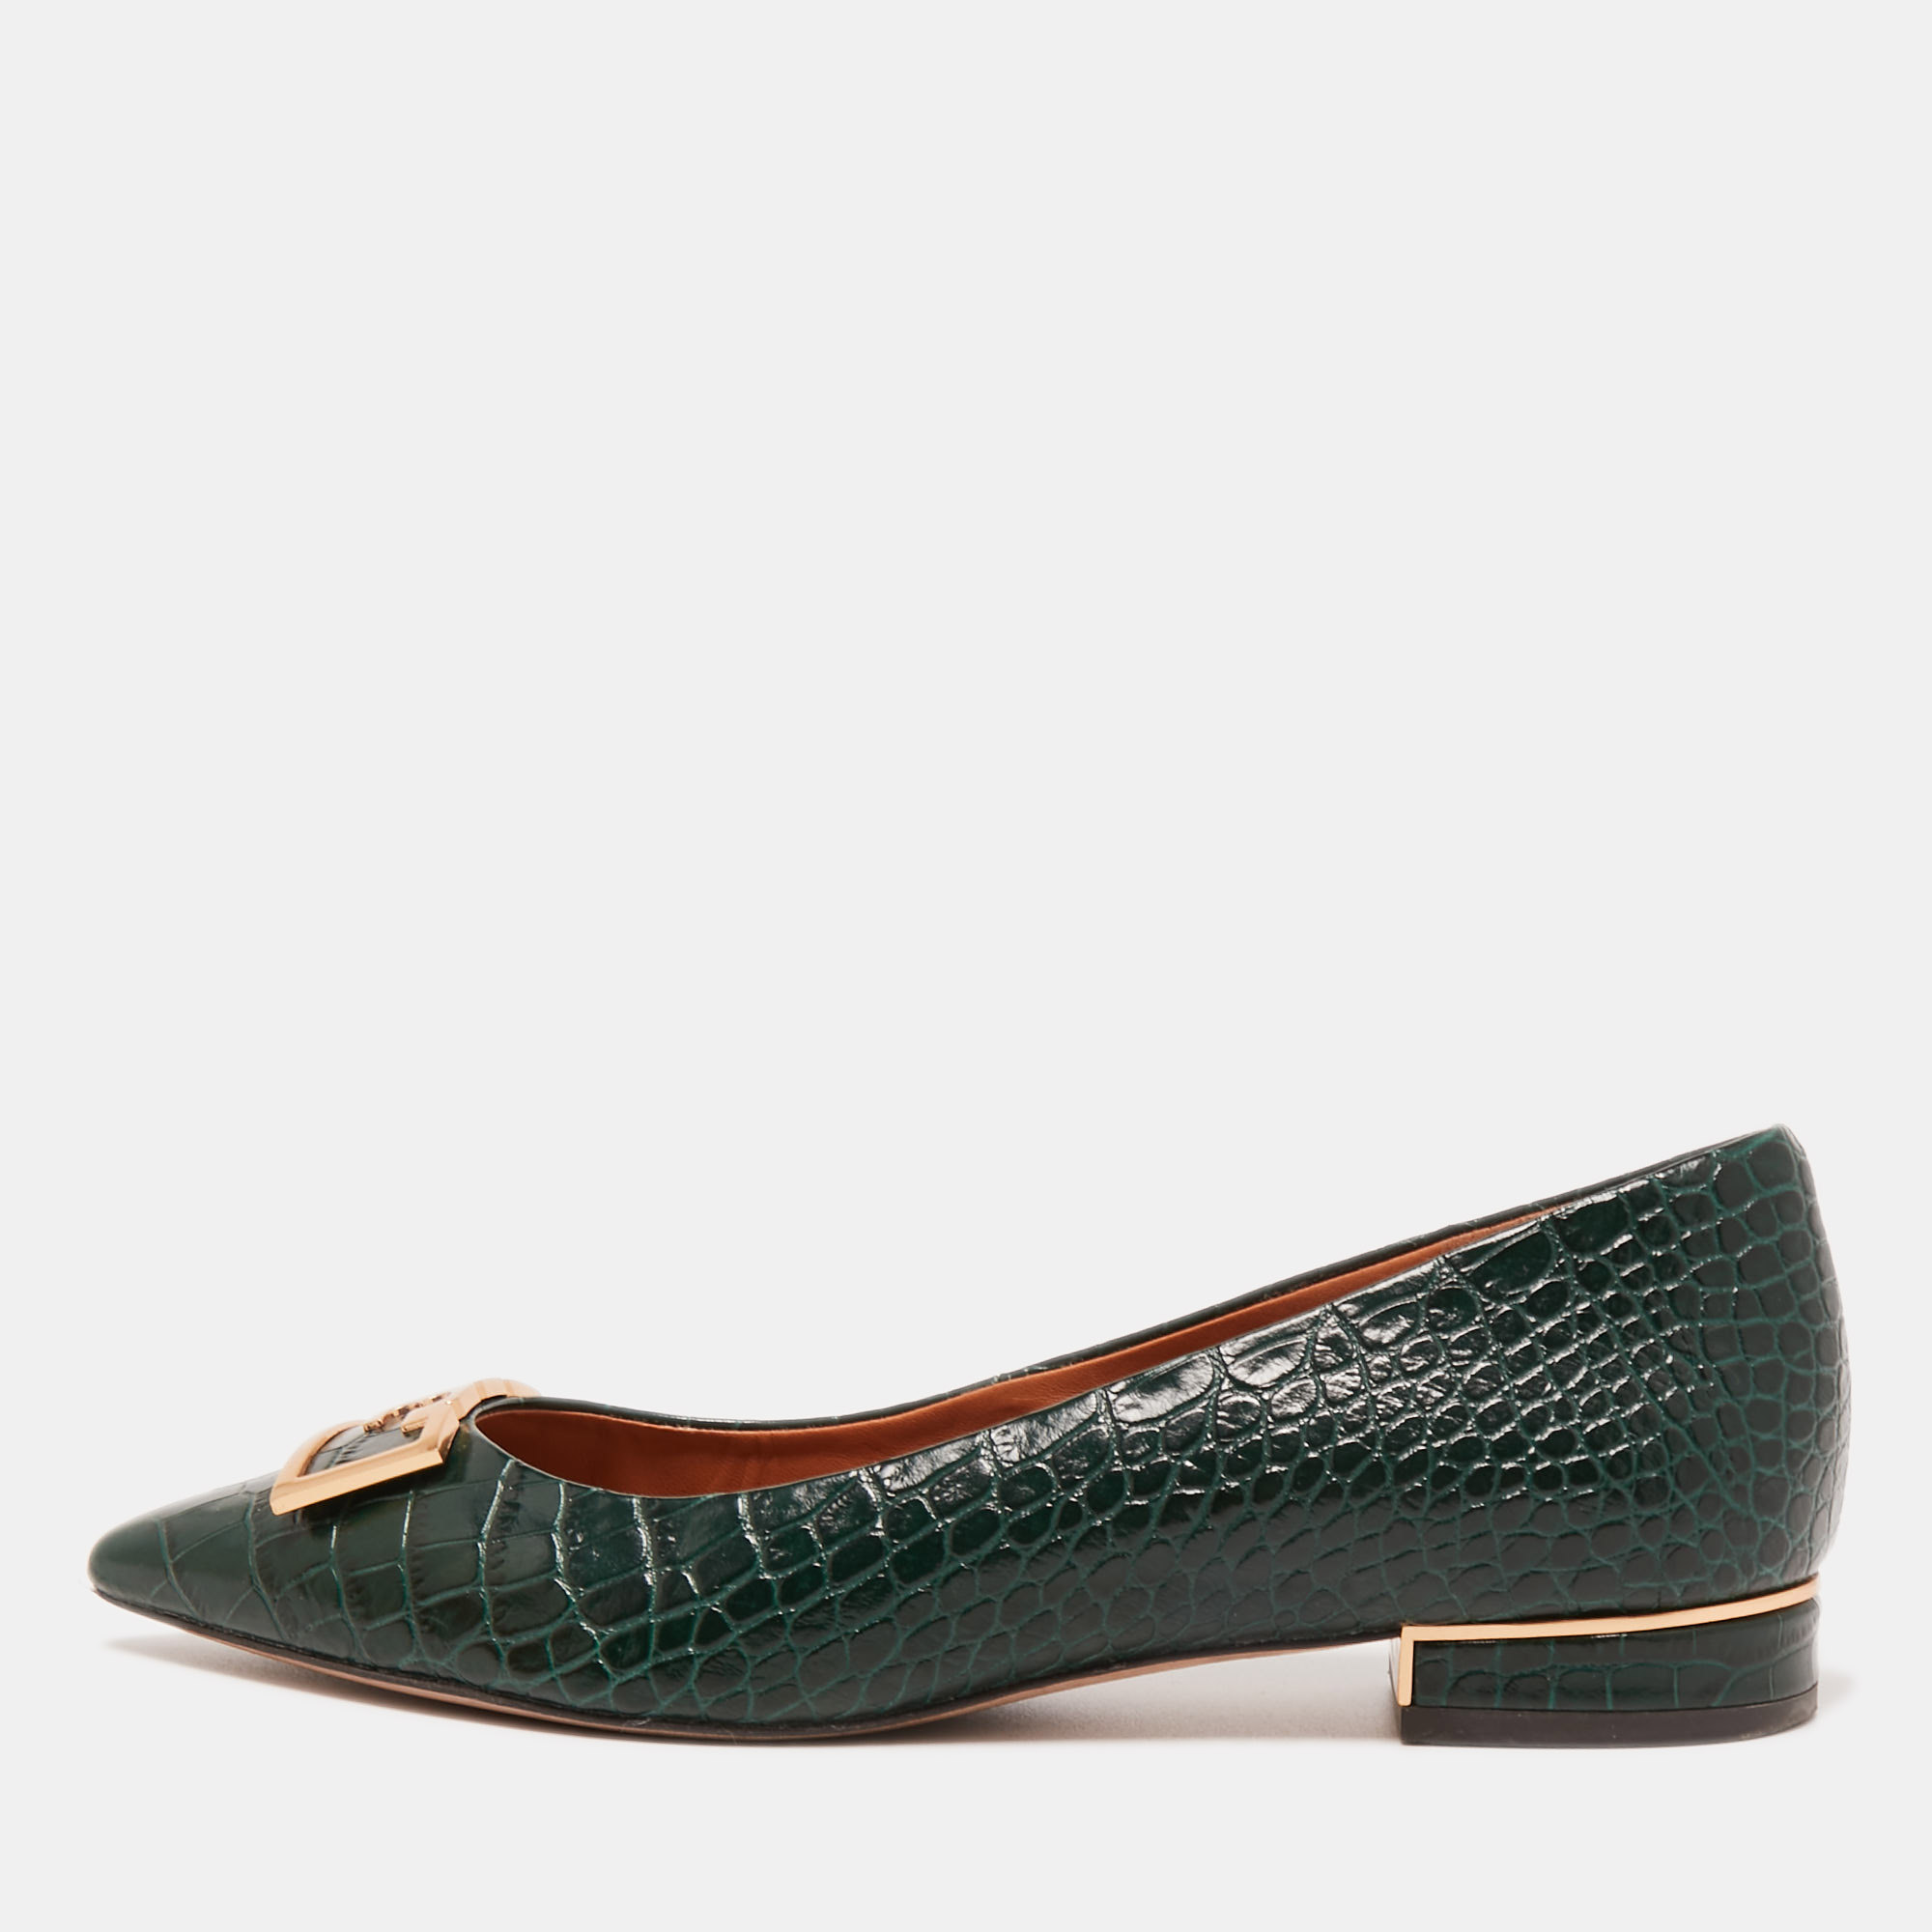 

Tory Burch Green Croc Embossed Leather Pointed Toe Ballet Flats Size